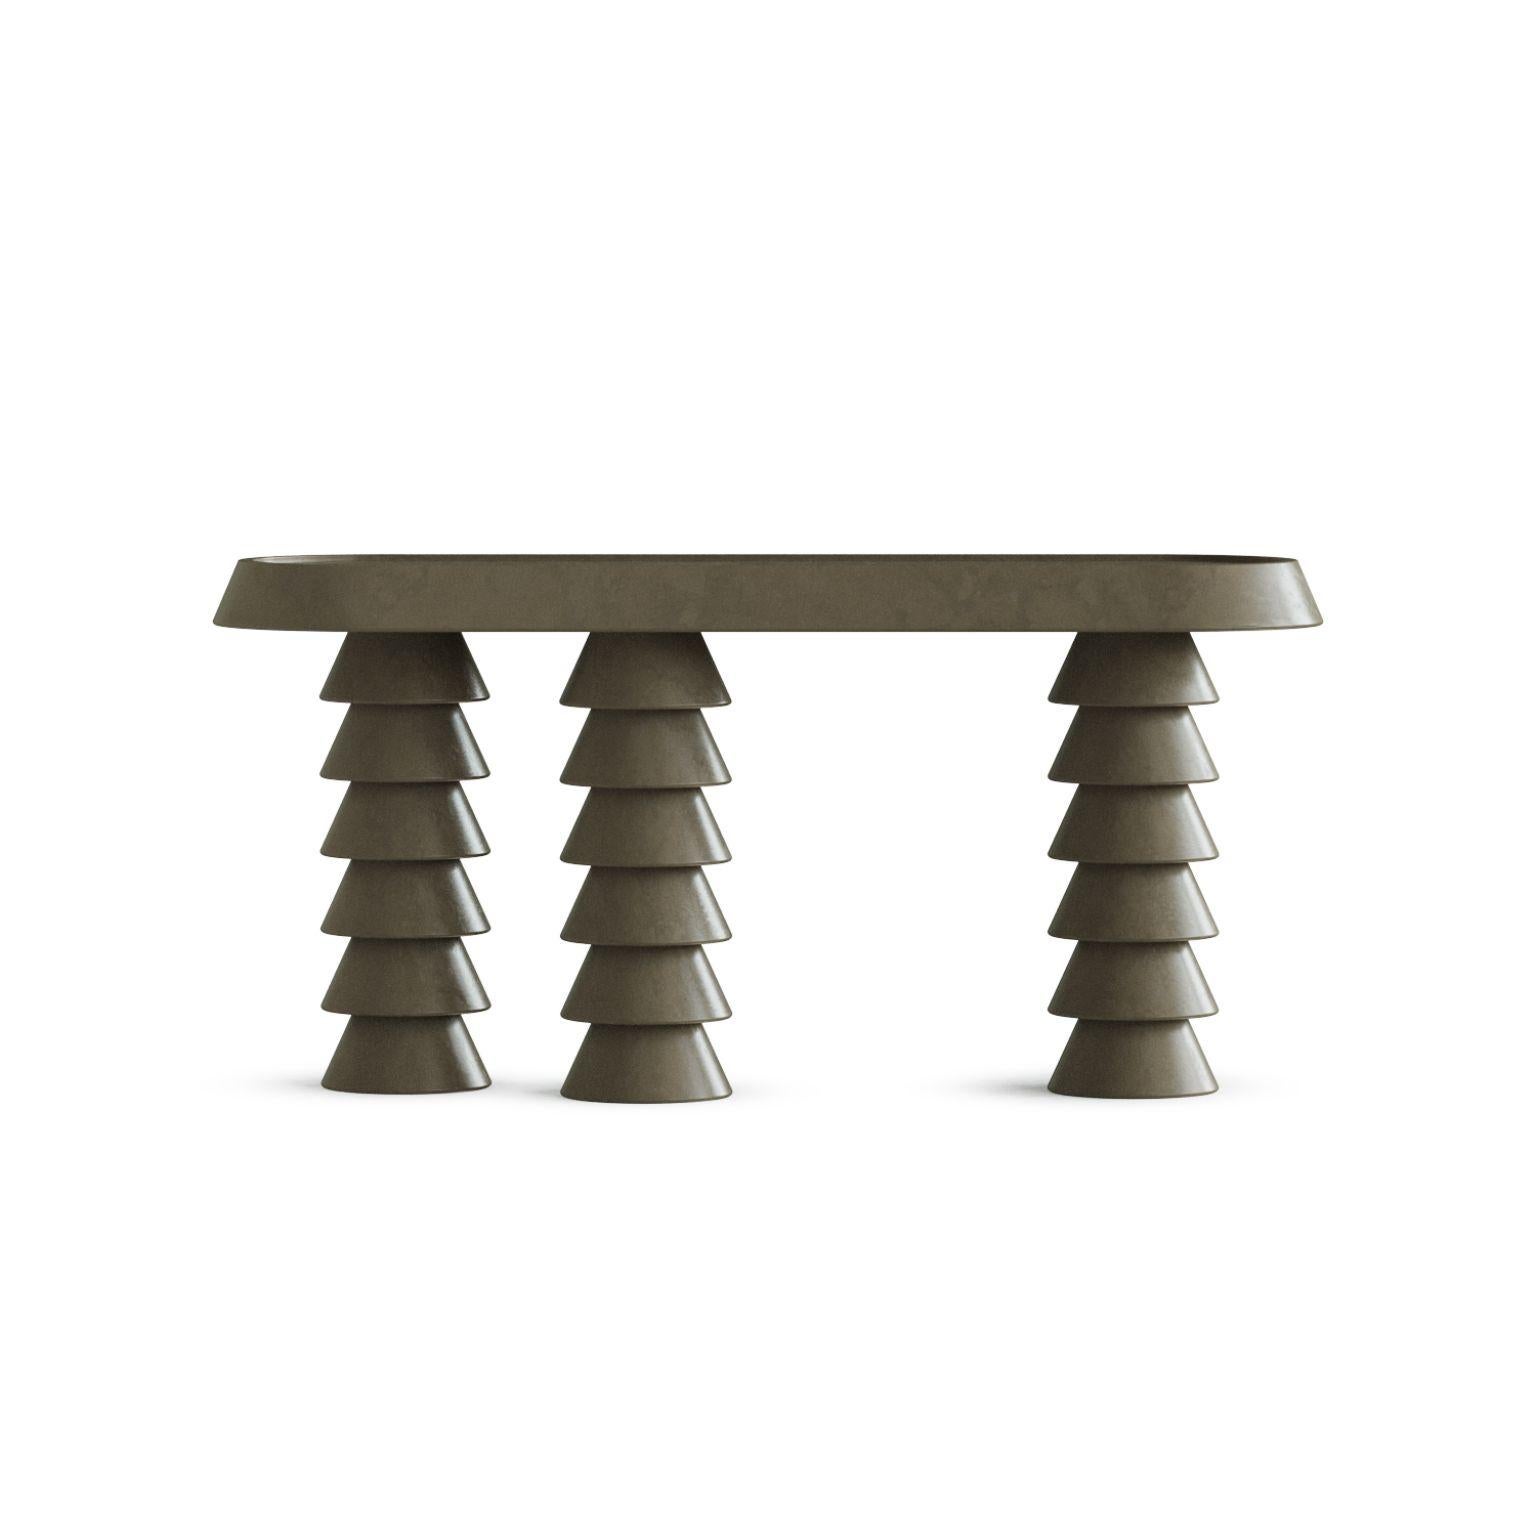 Trigono Dark Grey Console Table by Studio Anansi
Dimensions: D46 x W153 x H74 cm
Materials: limestone
Custom stones available.. Please contact us.

Studio ANANSI, founded by Evan Jerry in 2018, represents a reection on modernity with a nod to the